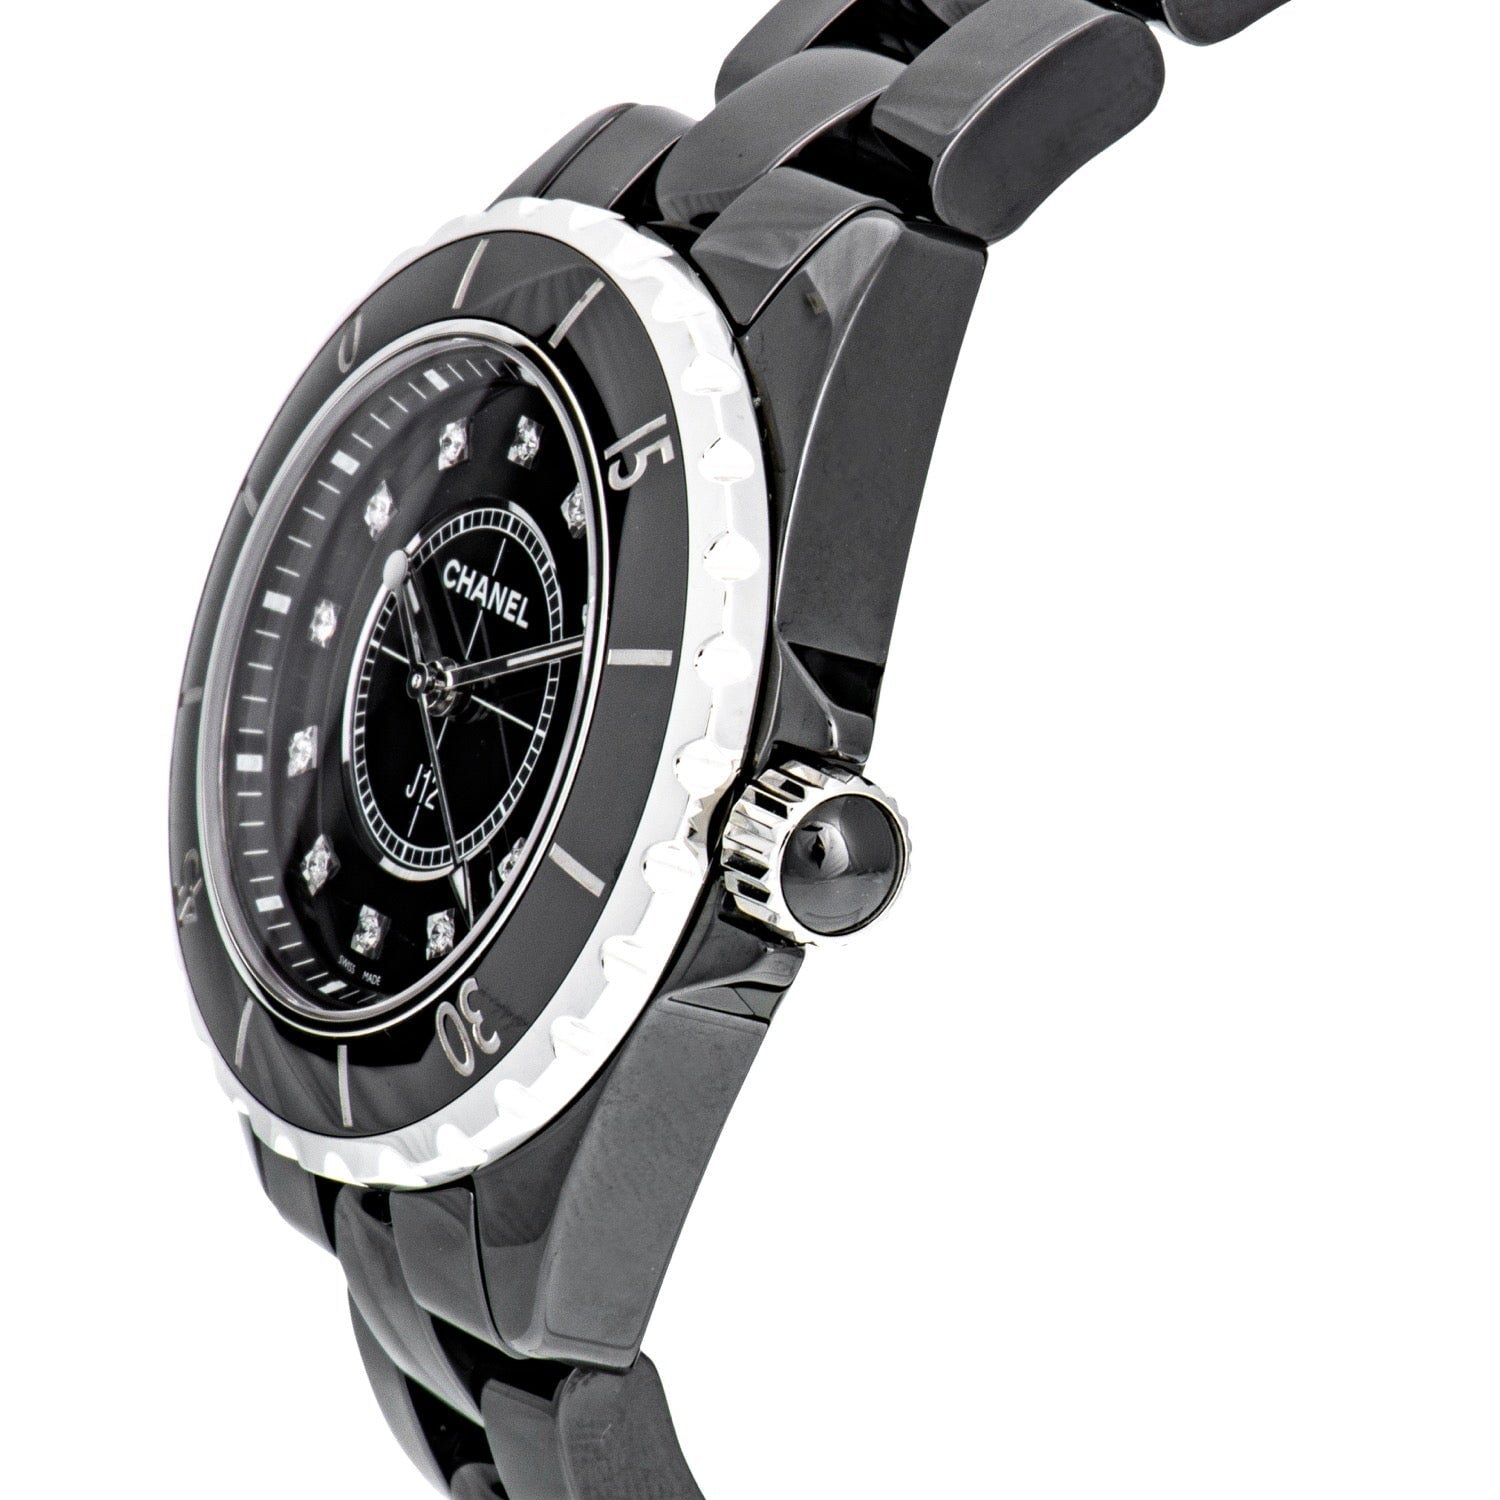 The blue J12-G.10 Chromatic watch by Chanel